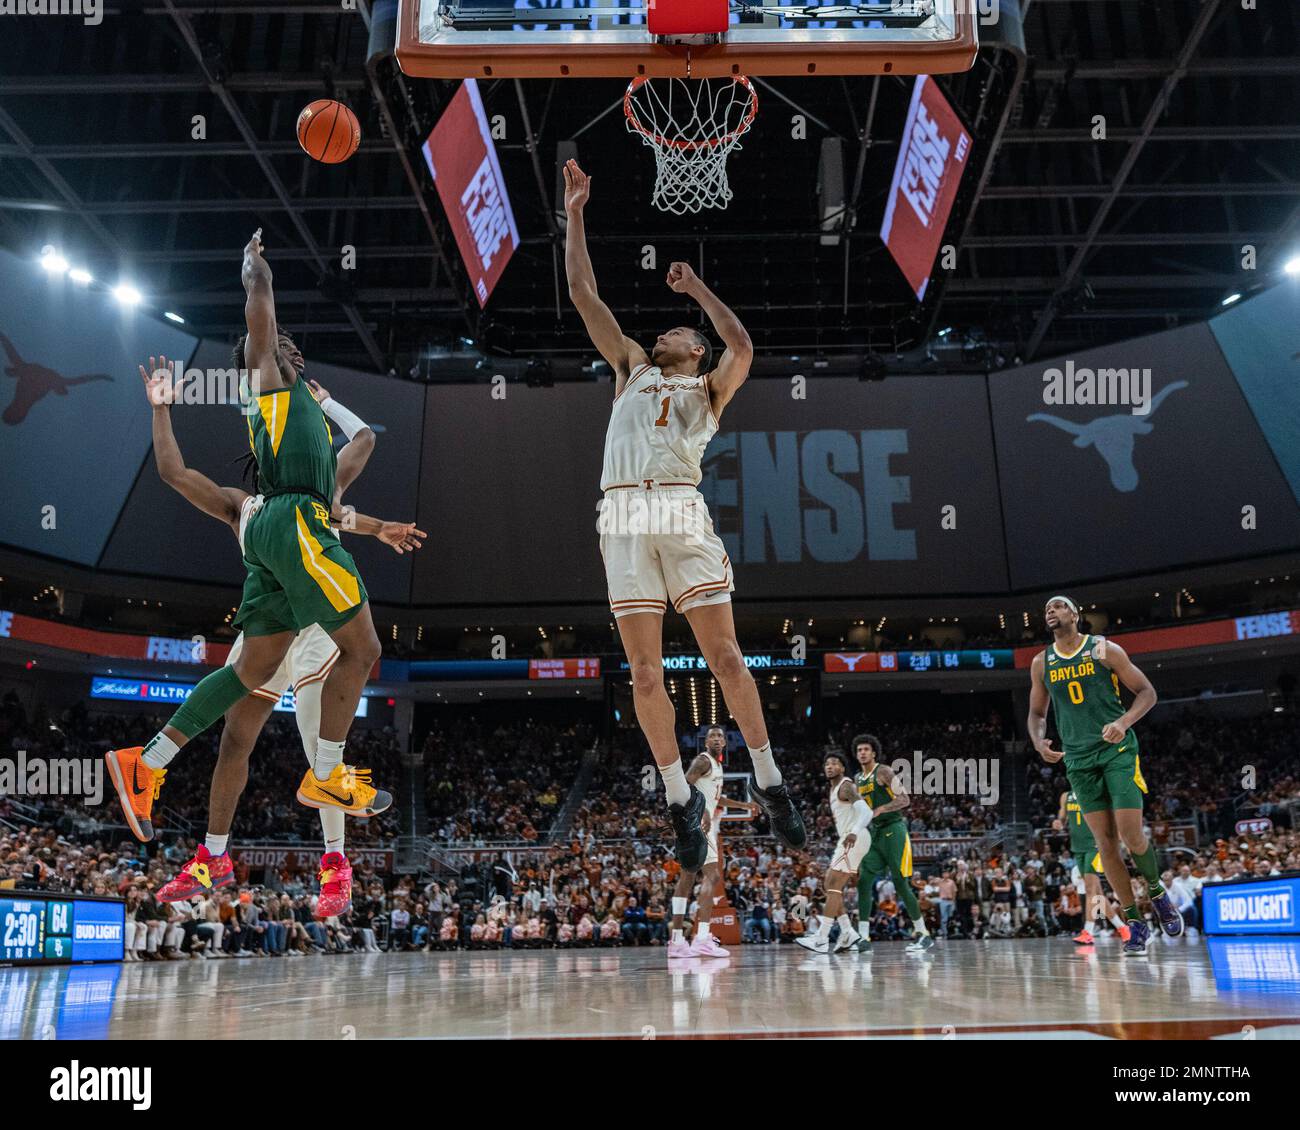 Jan 30, 2023. LJ Cryer #4 of the Baylor Bears in action vs the Texas Longhorns at the Moody Center. Texas defeats Baylor 76-71. Stock Photo